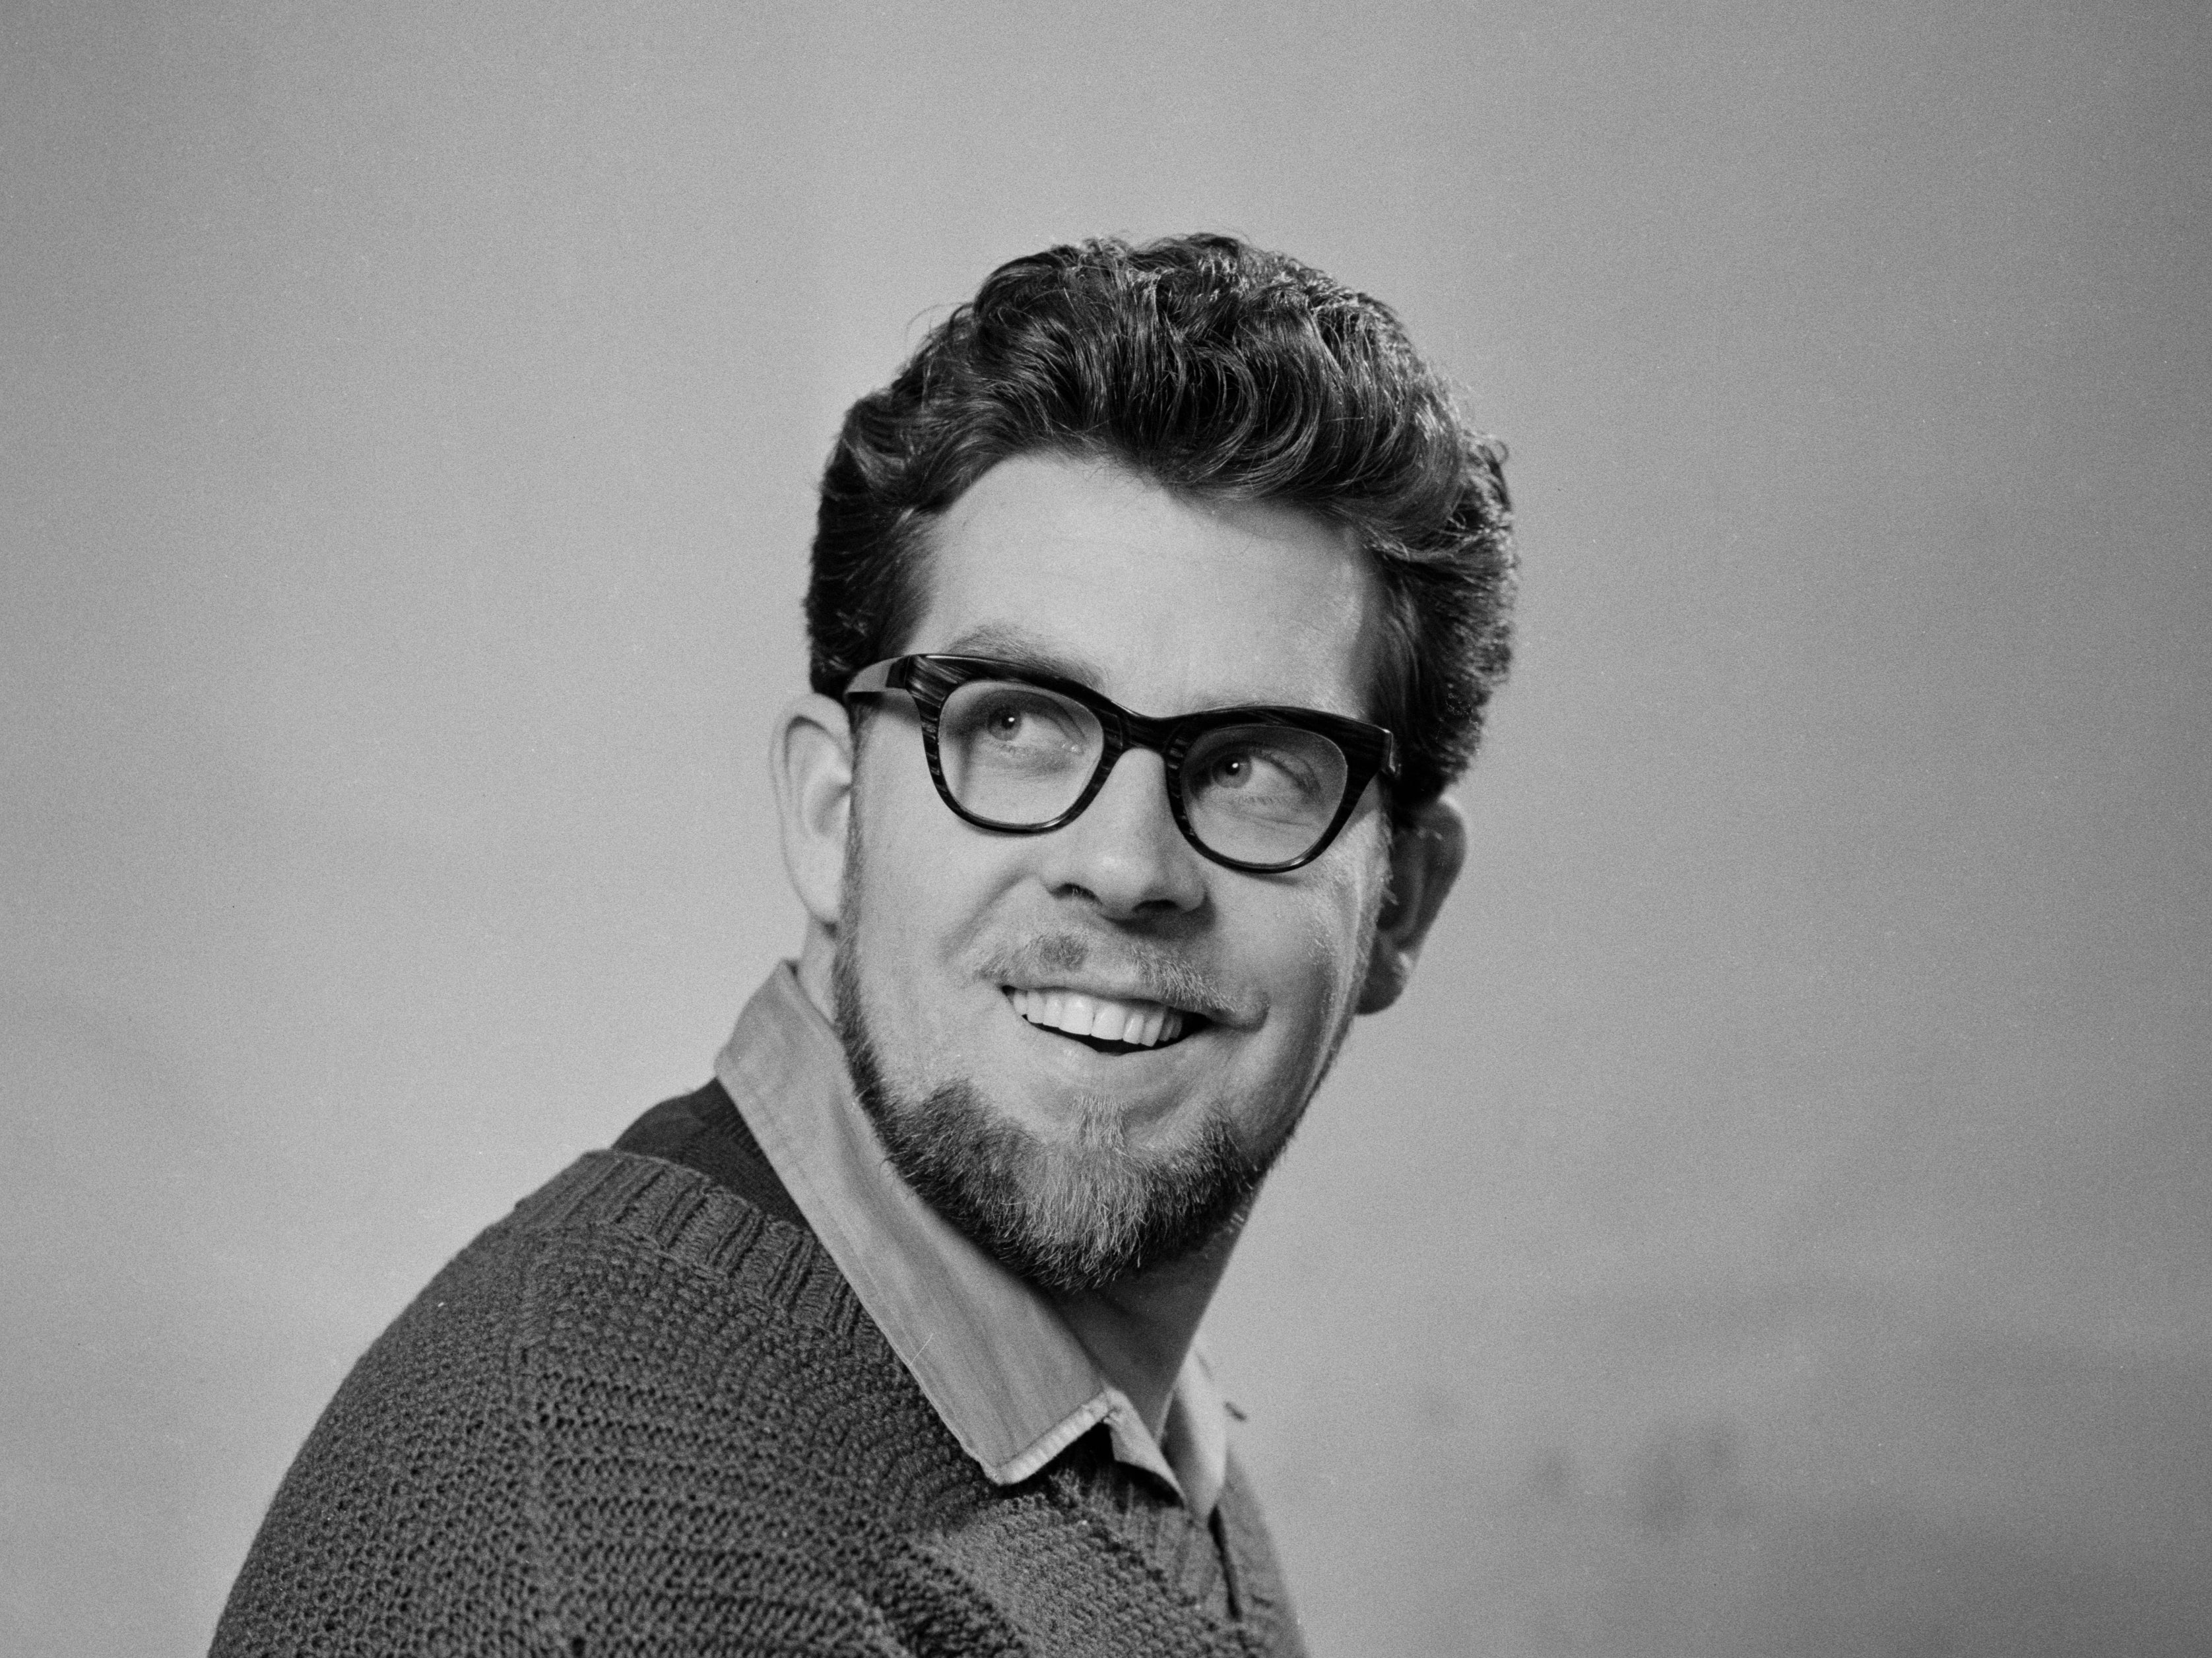 Rolf Harris photographed in 1964